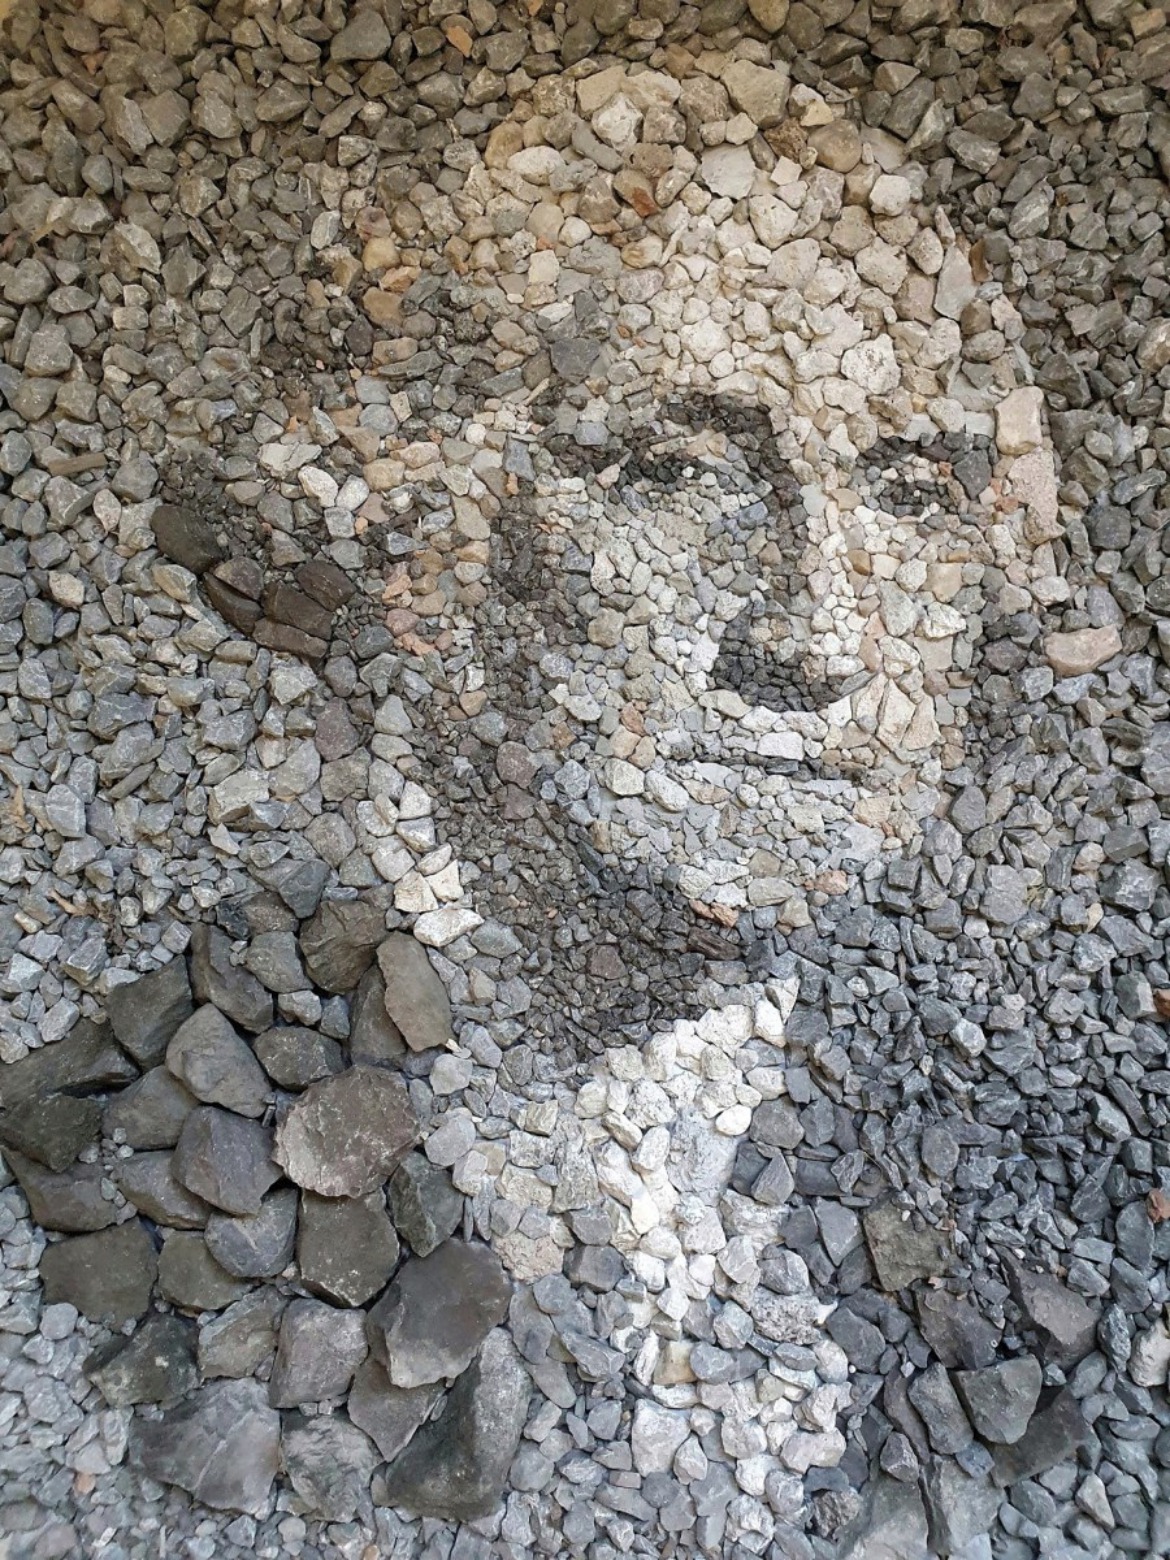 Extraordinary Mosaic Portraits Made With Pebbles By Justin Bateman